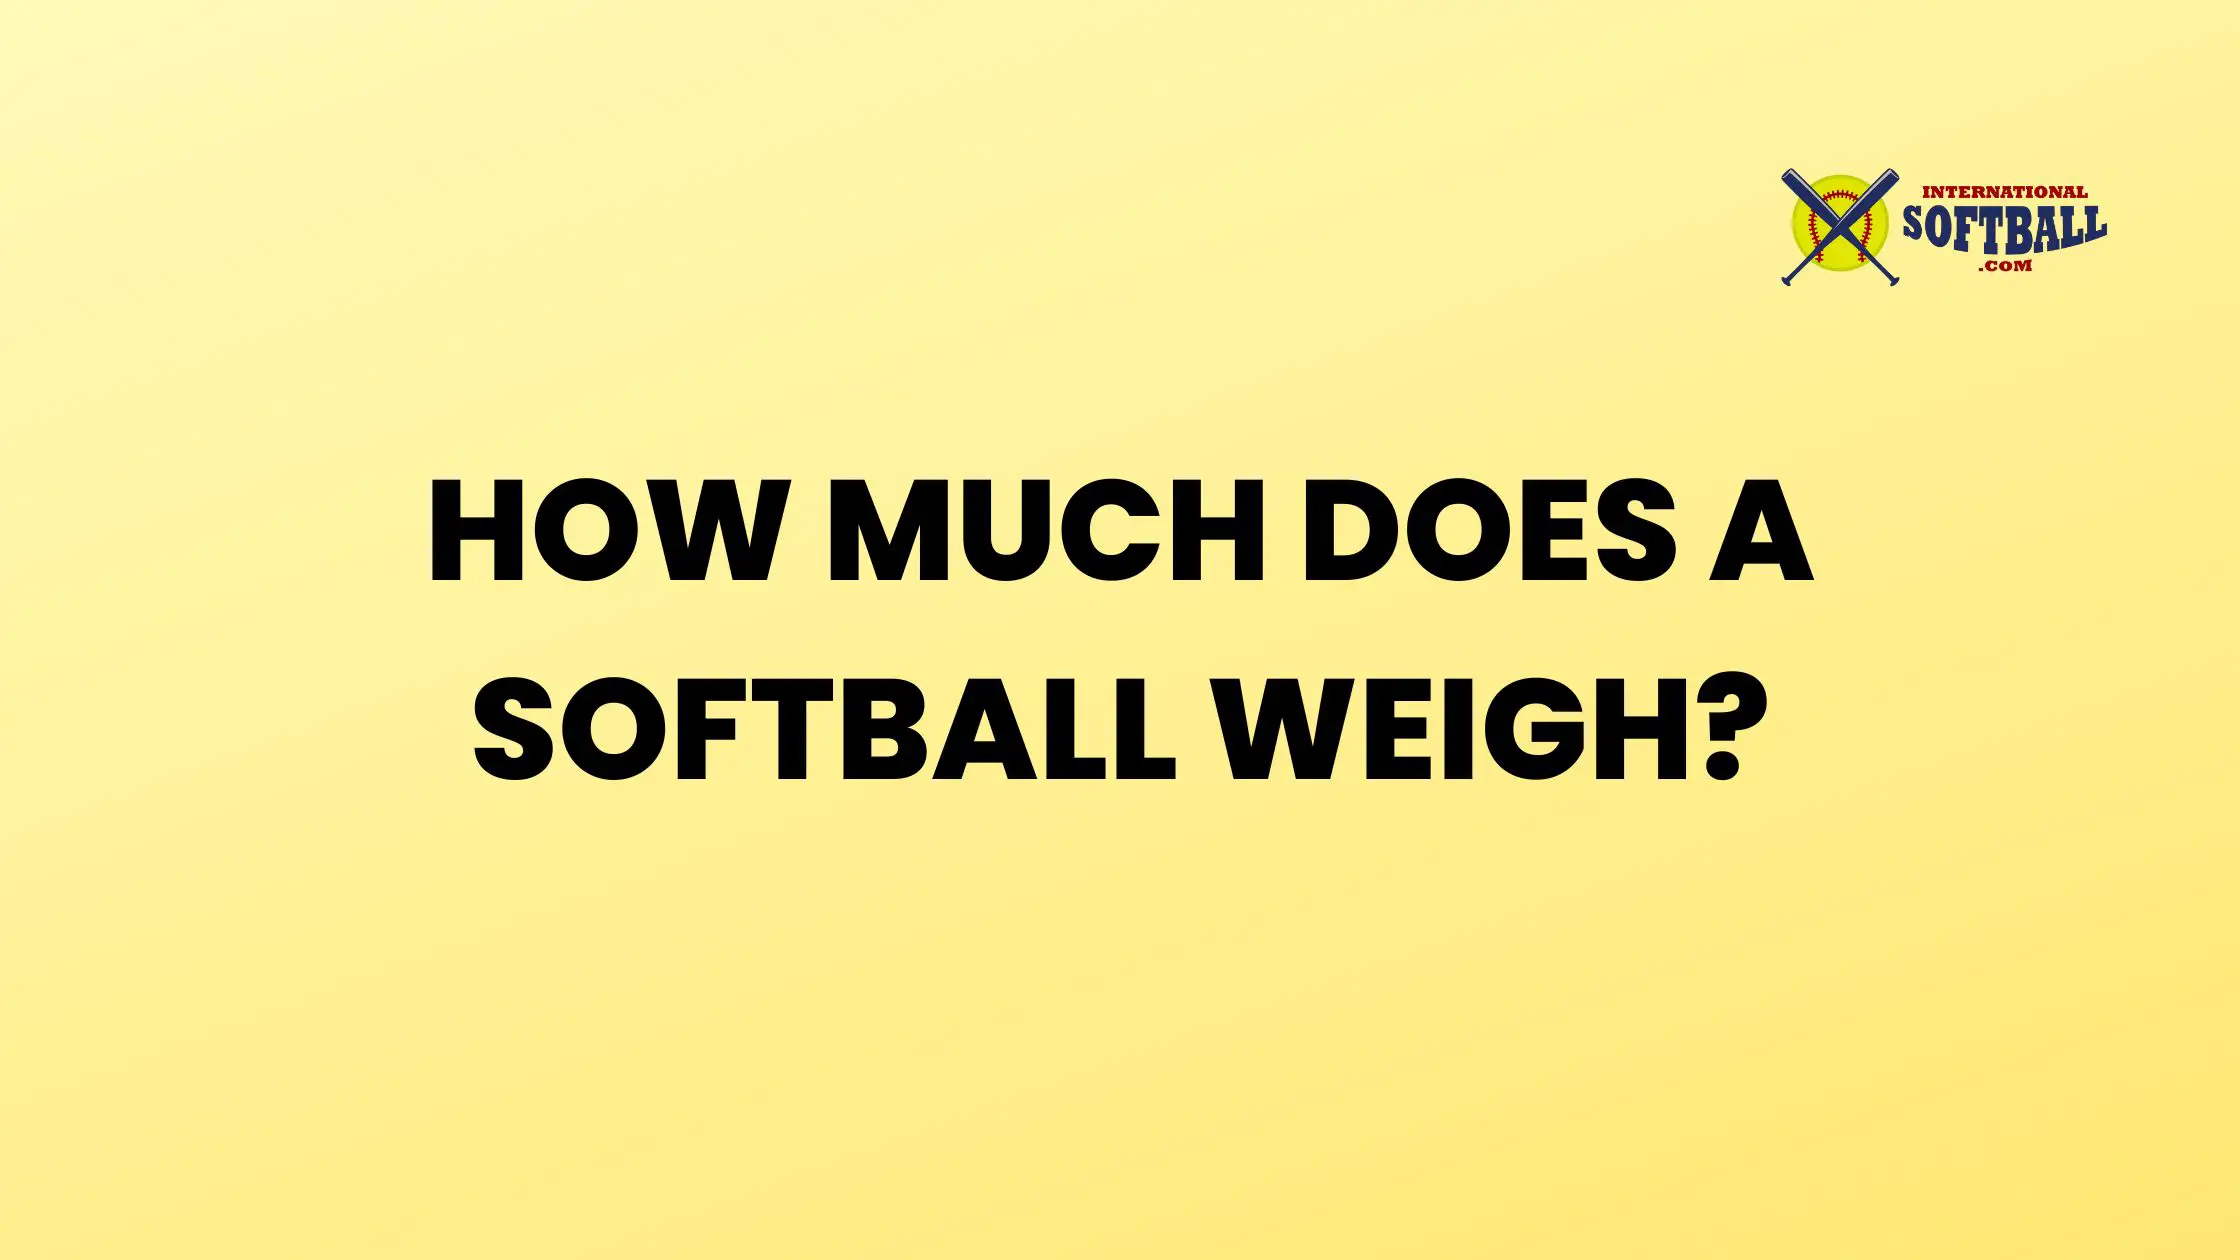 HOW MUCH DOES A SOFTBALL WEIGH?